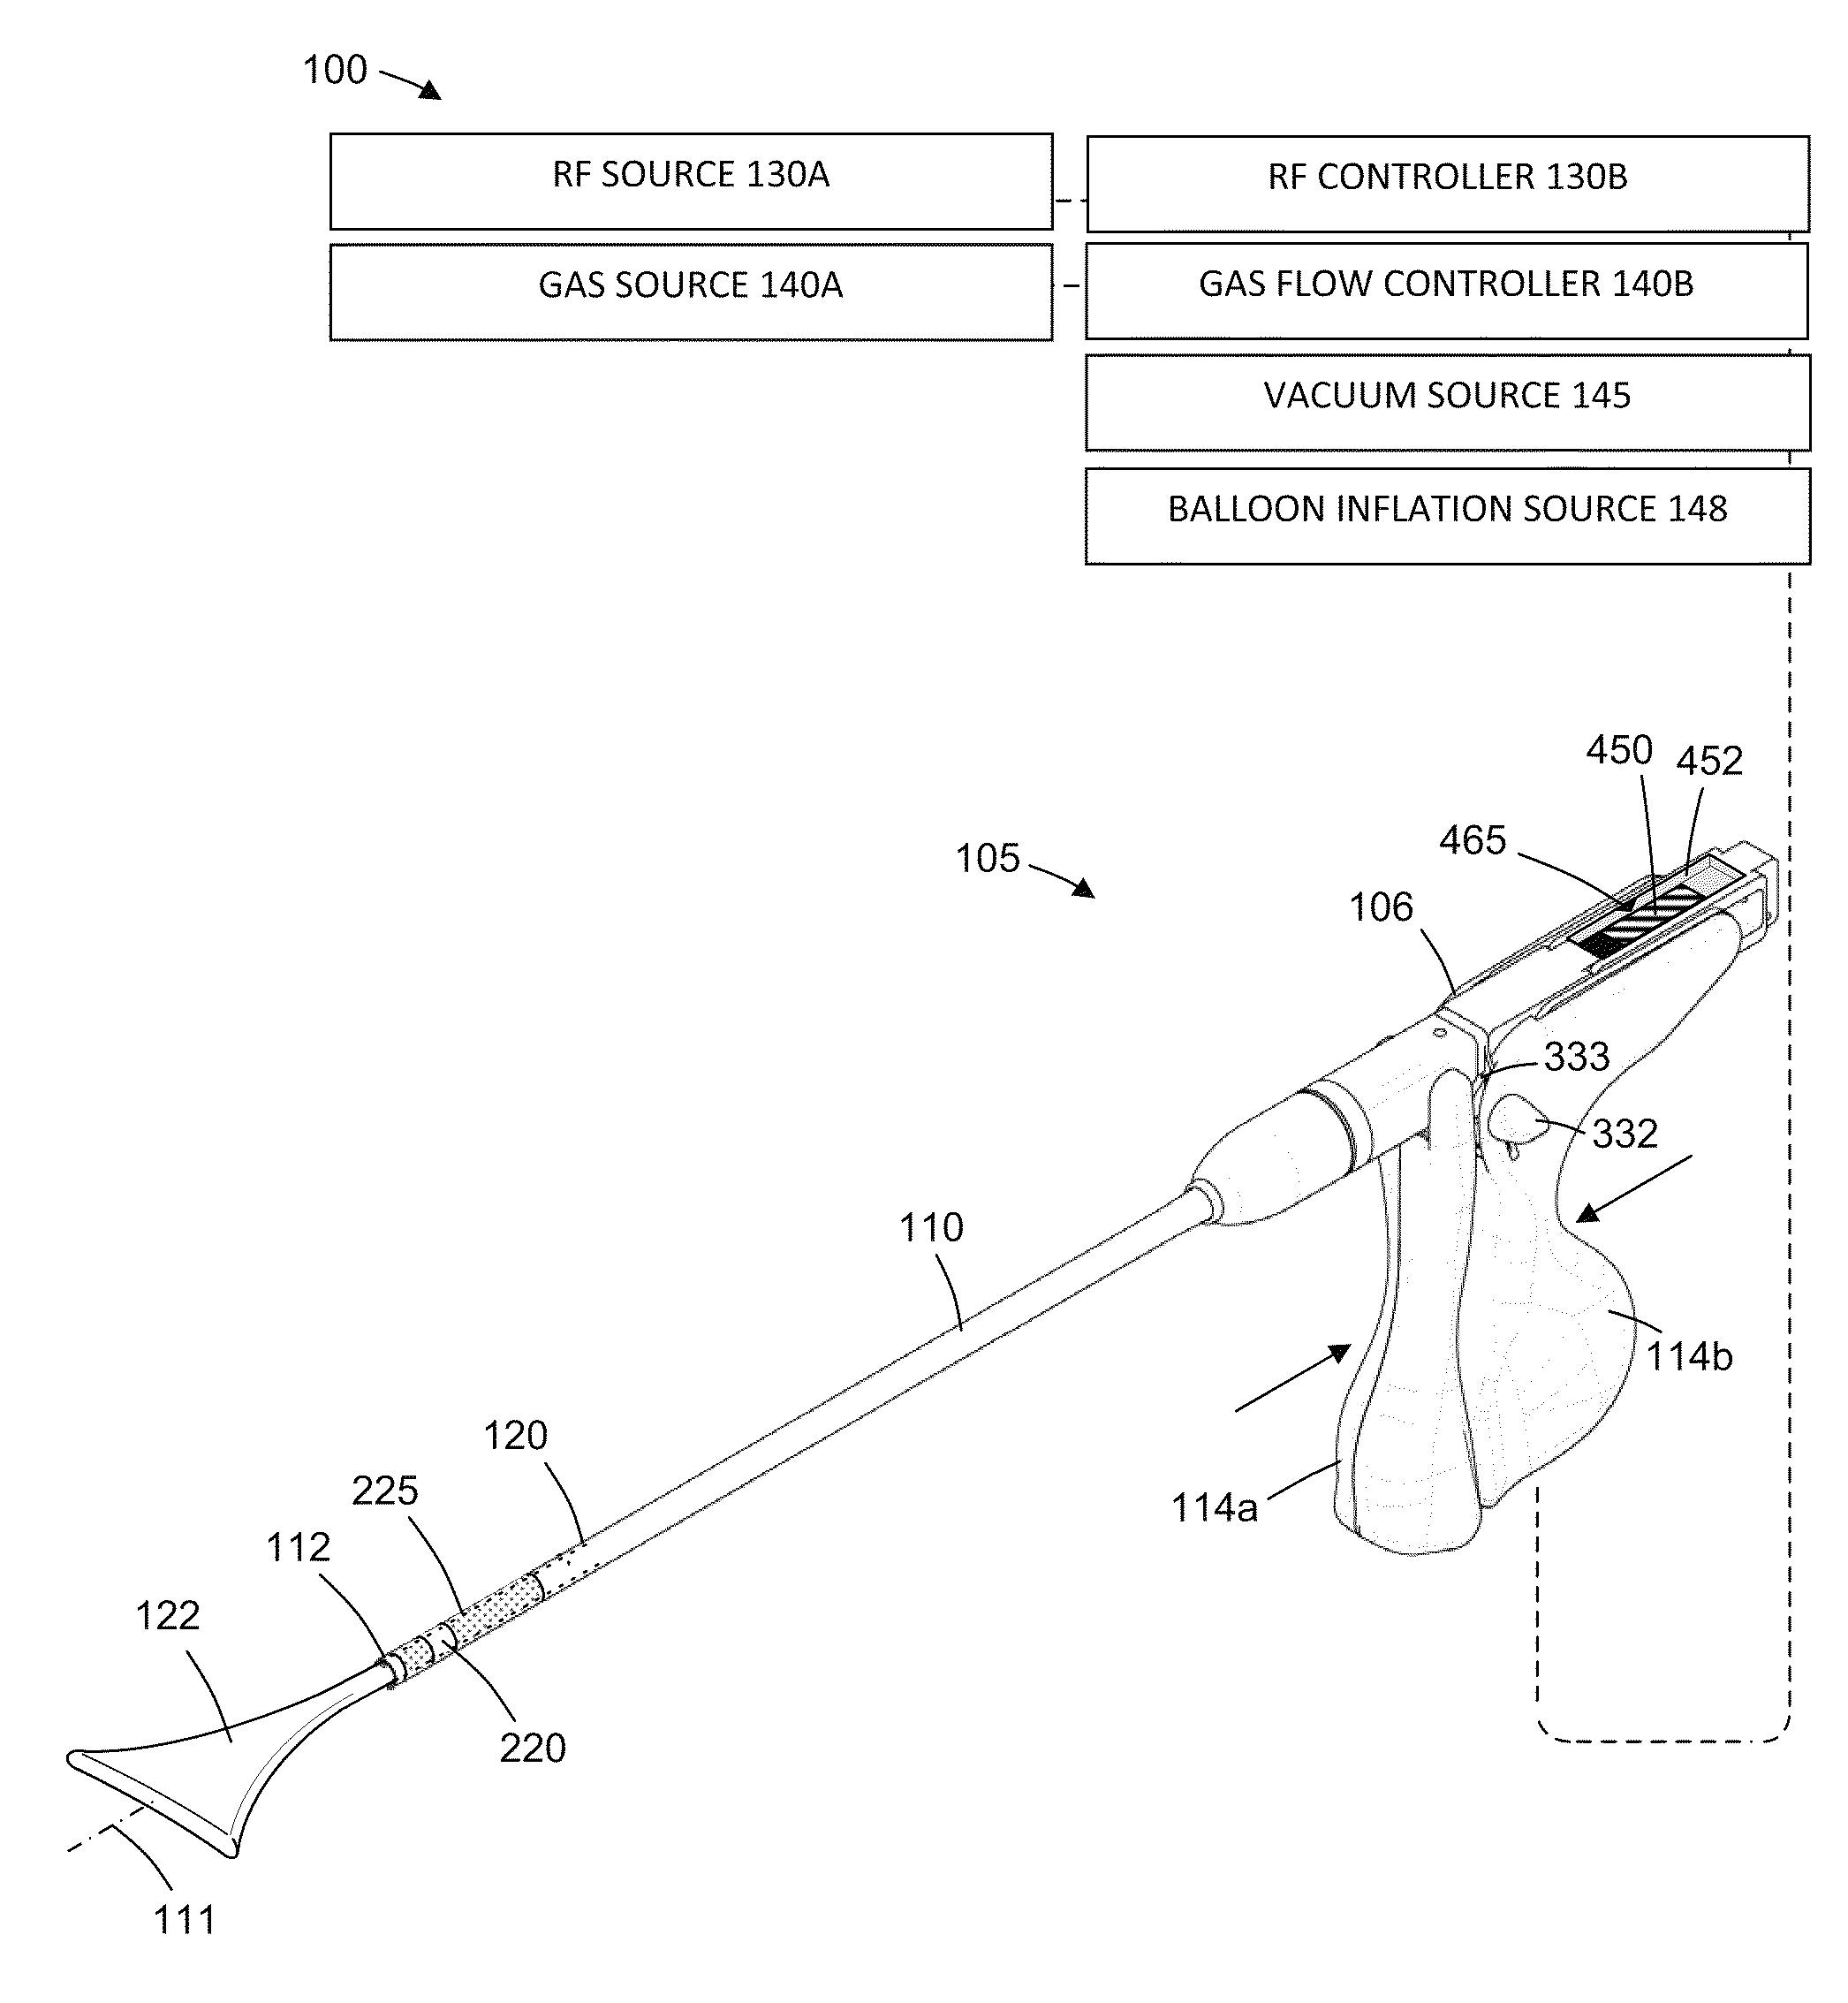 Systems and methods for endometrial ablation